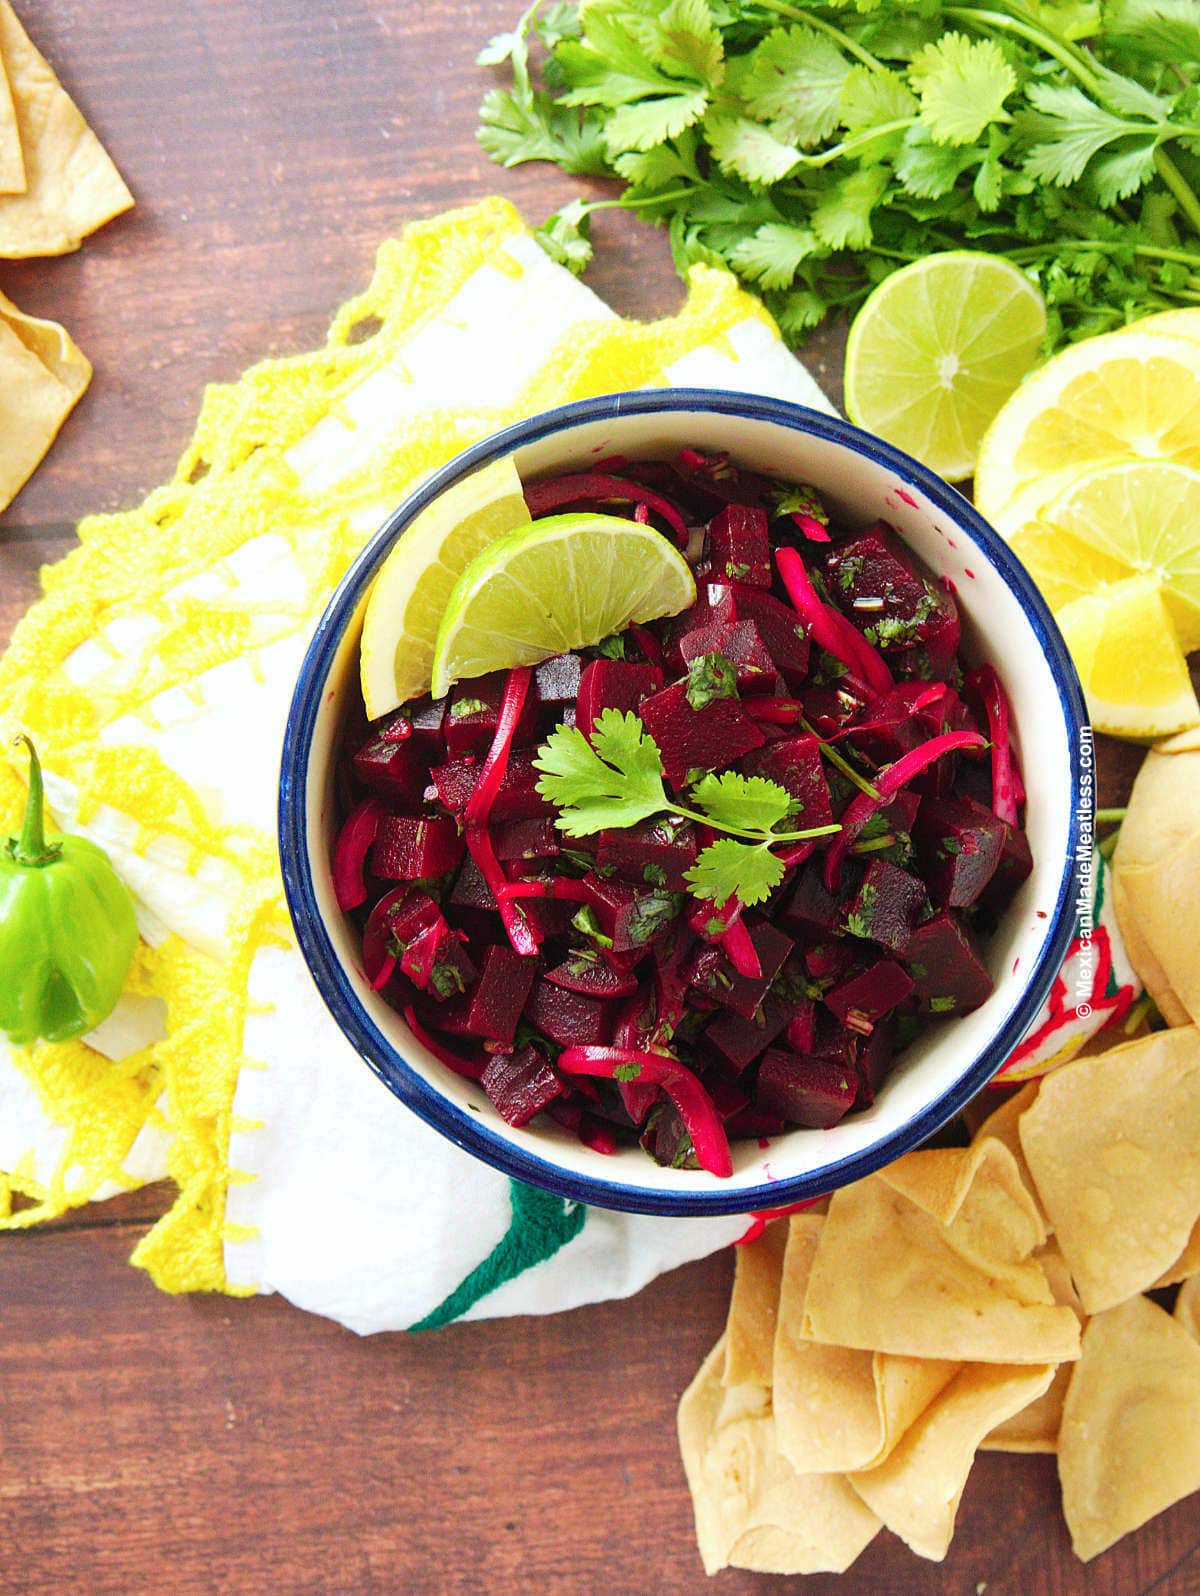 Yucatan-style beets prepared with orange juice, lime juice, red onions, cilantro and habanero pepper, served in a small white bowl.